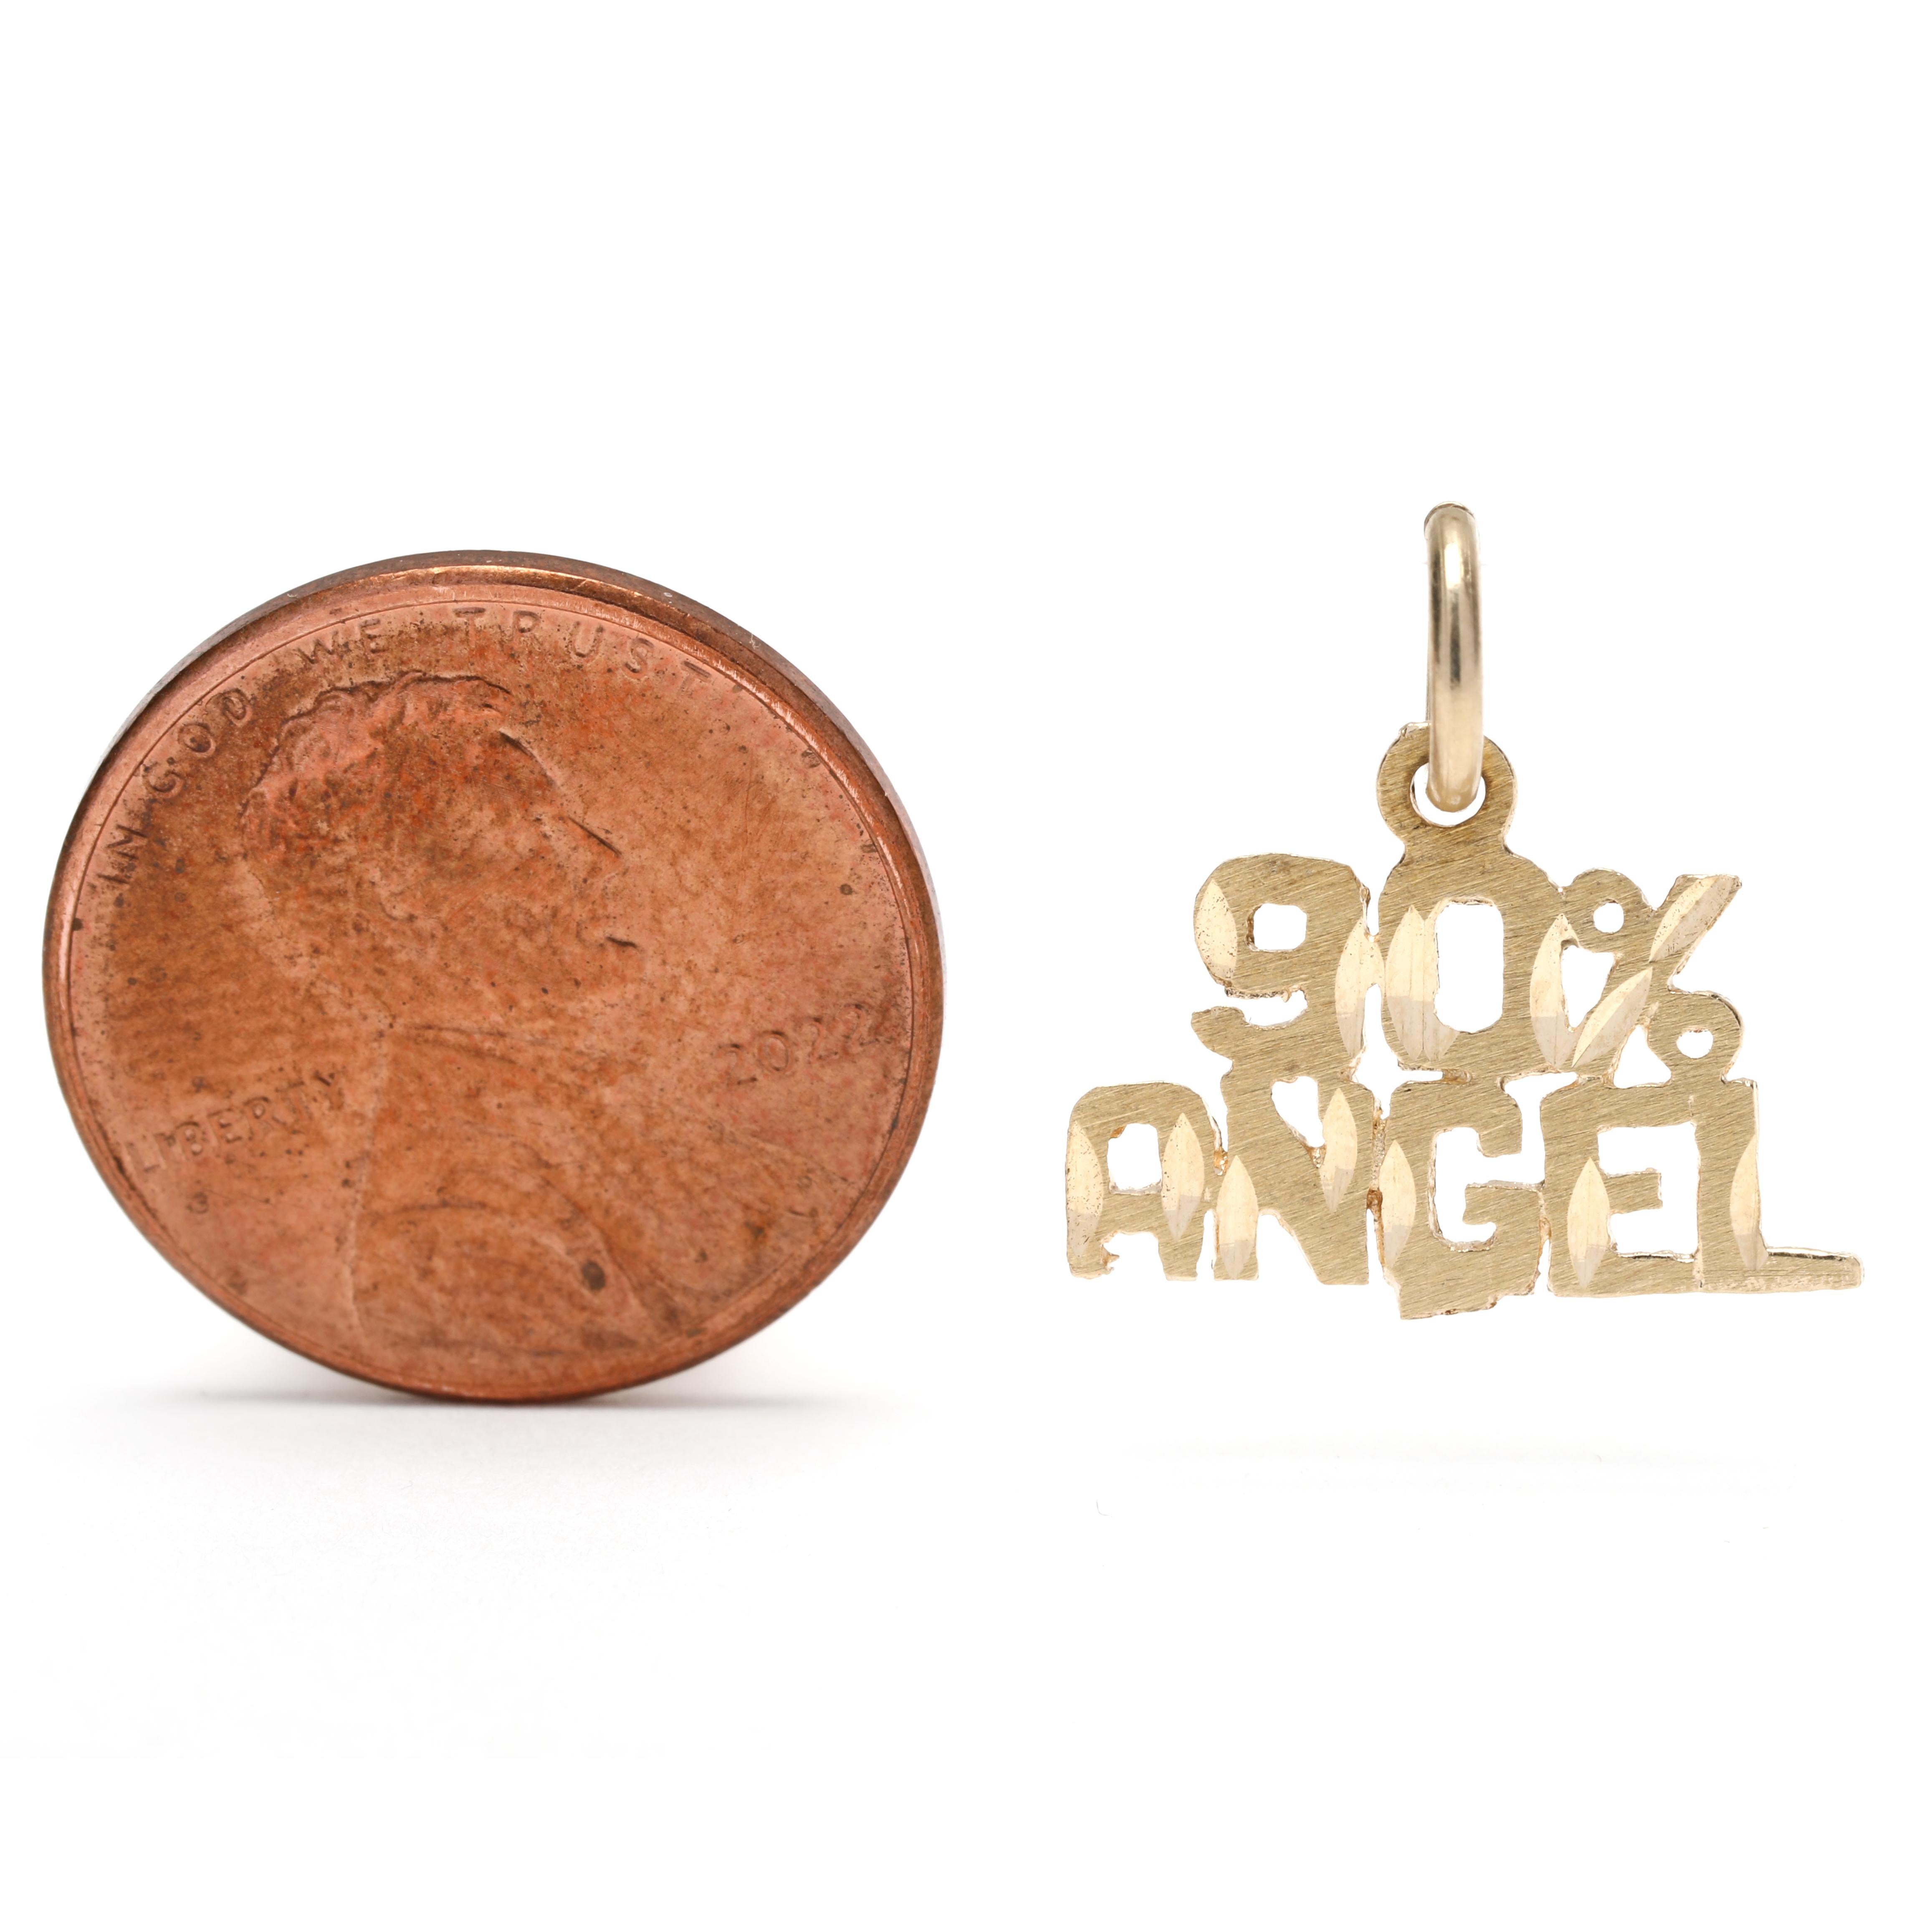 This beautiful 14K Yellow Gold 90% Angel Charm measures 5/8 inch in length and is a perfect flat charm for all of your jewelry creations. This small gold charm features a delicate angel design and is perfect for necklaces, charms, and other jewelry.